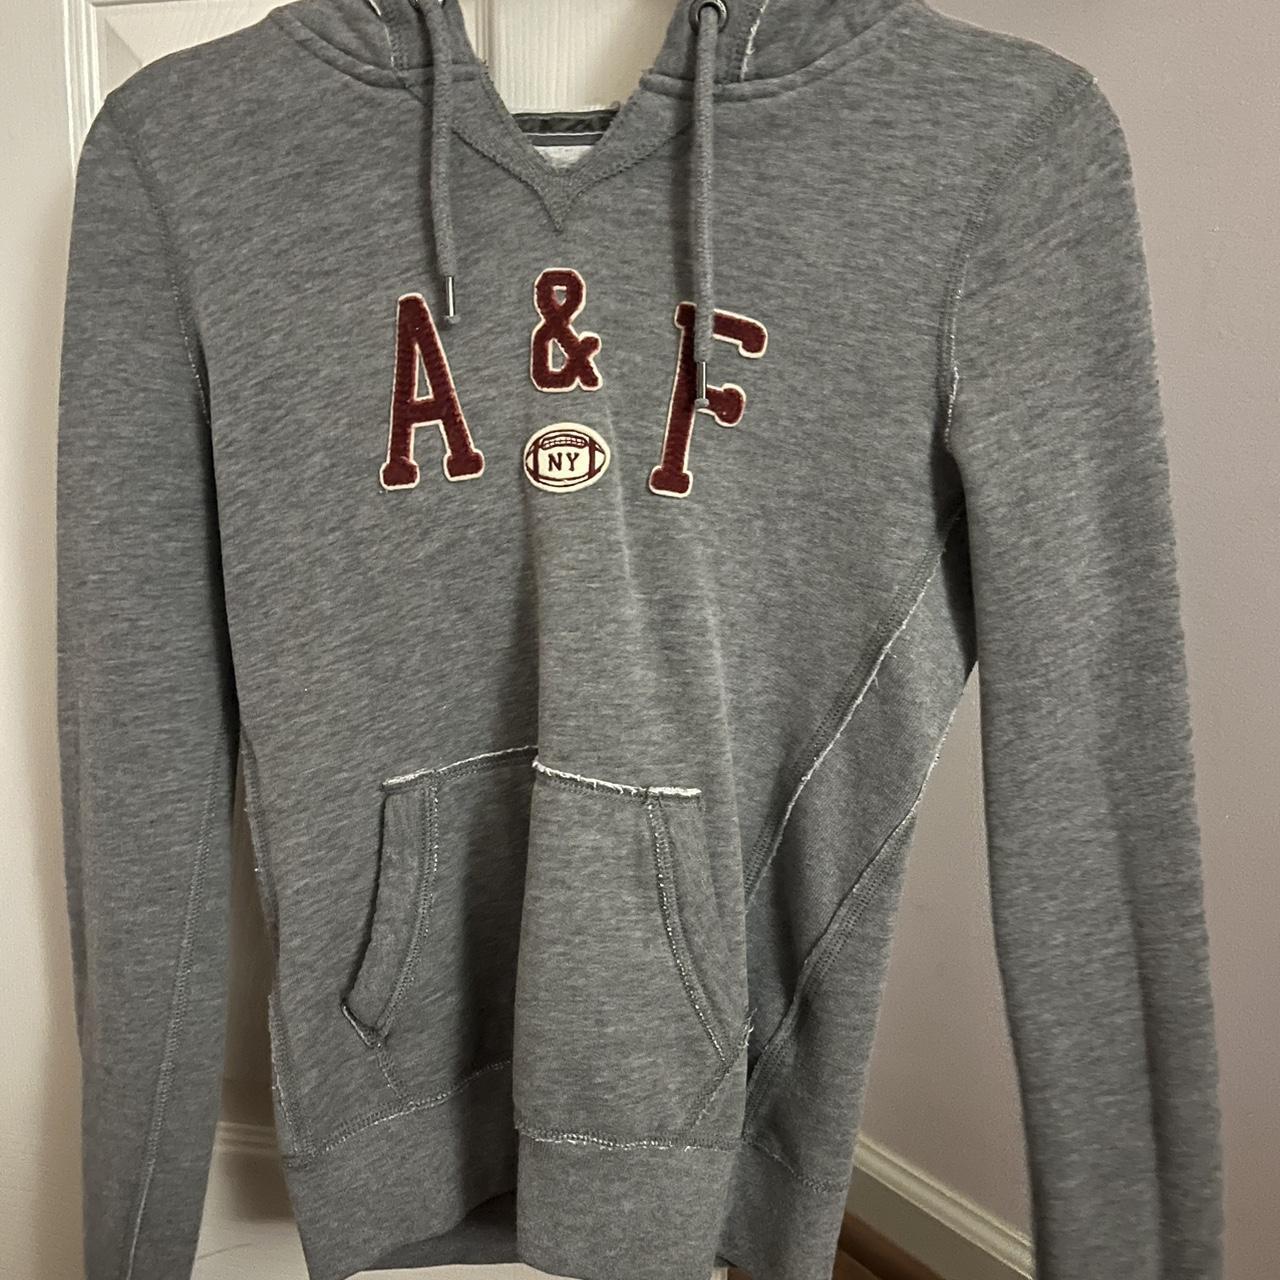 Abercrombie & Fitch Sweatshirt with A&F Logo